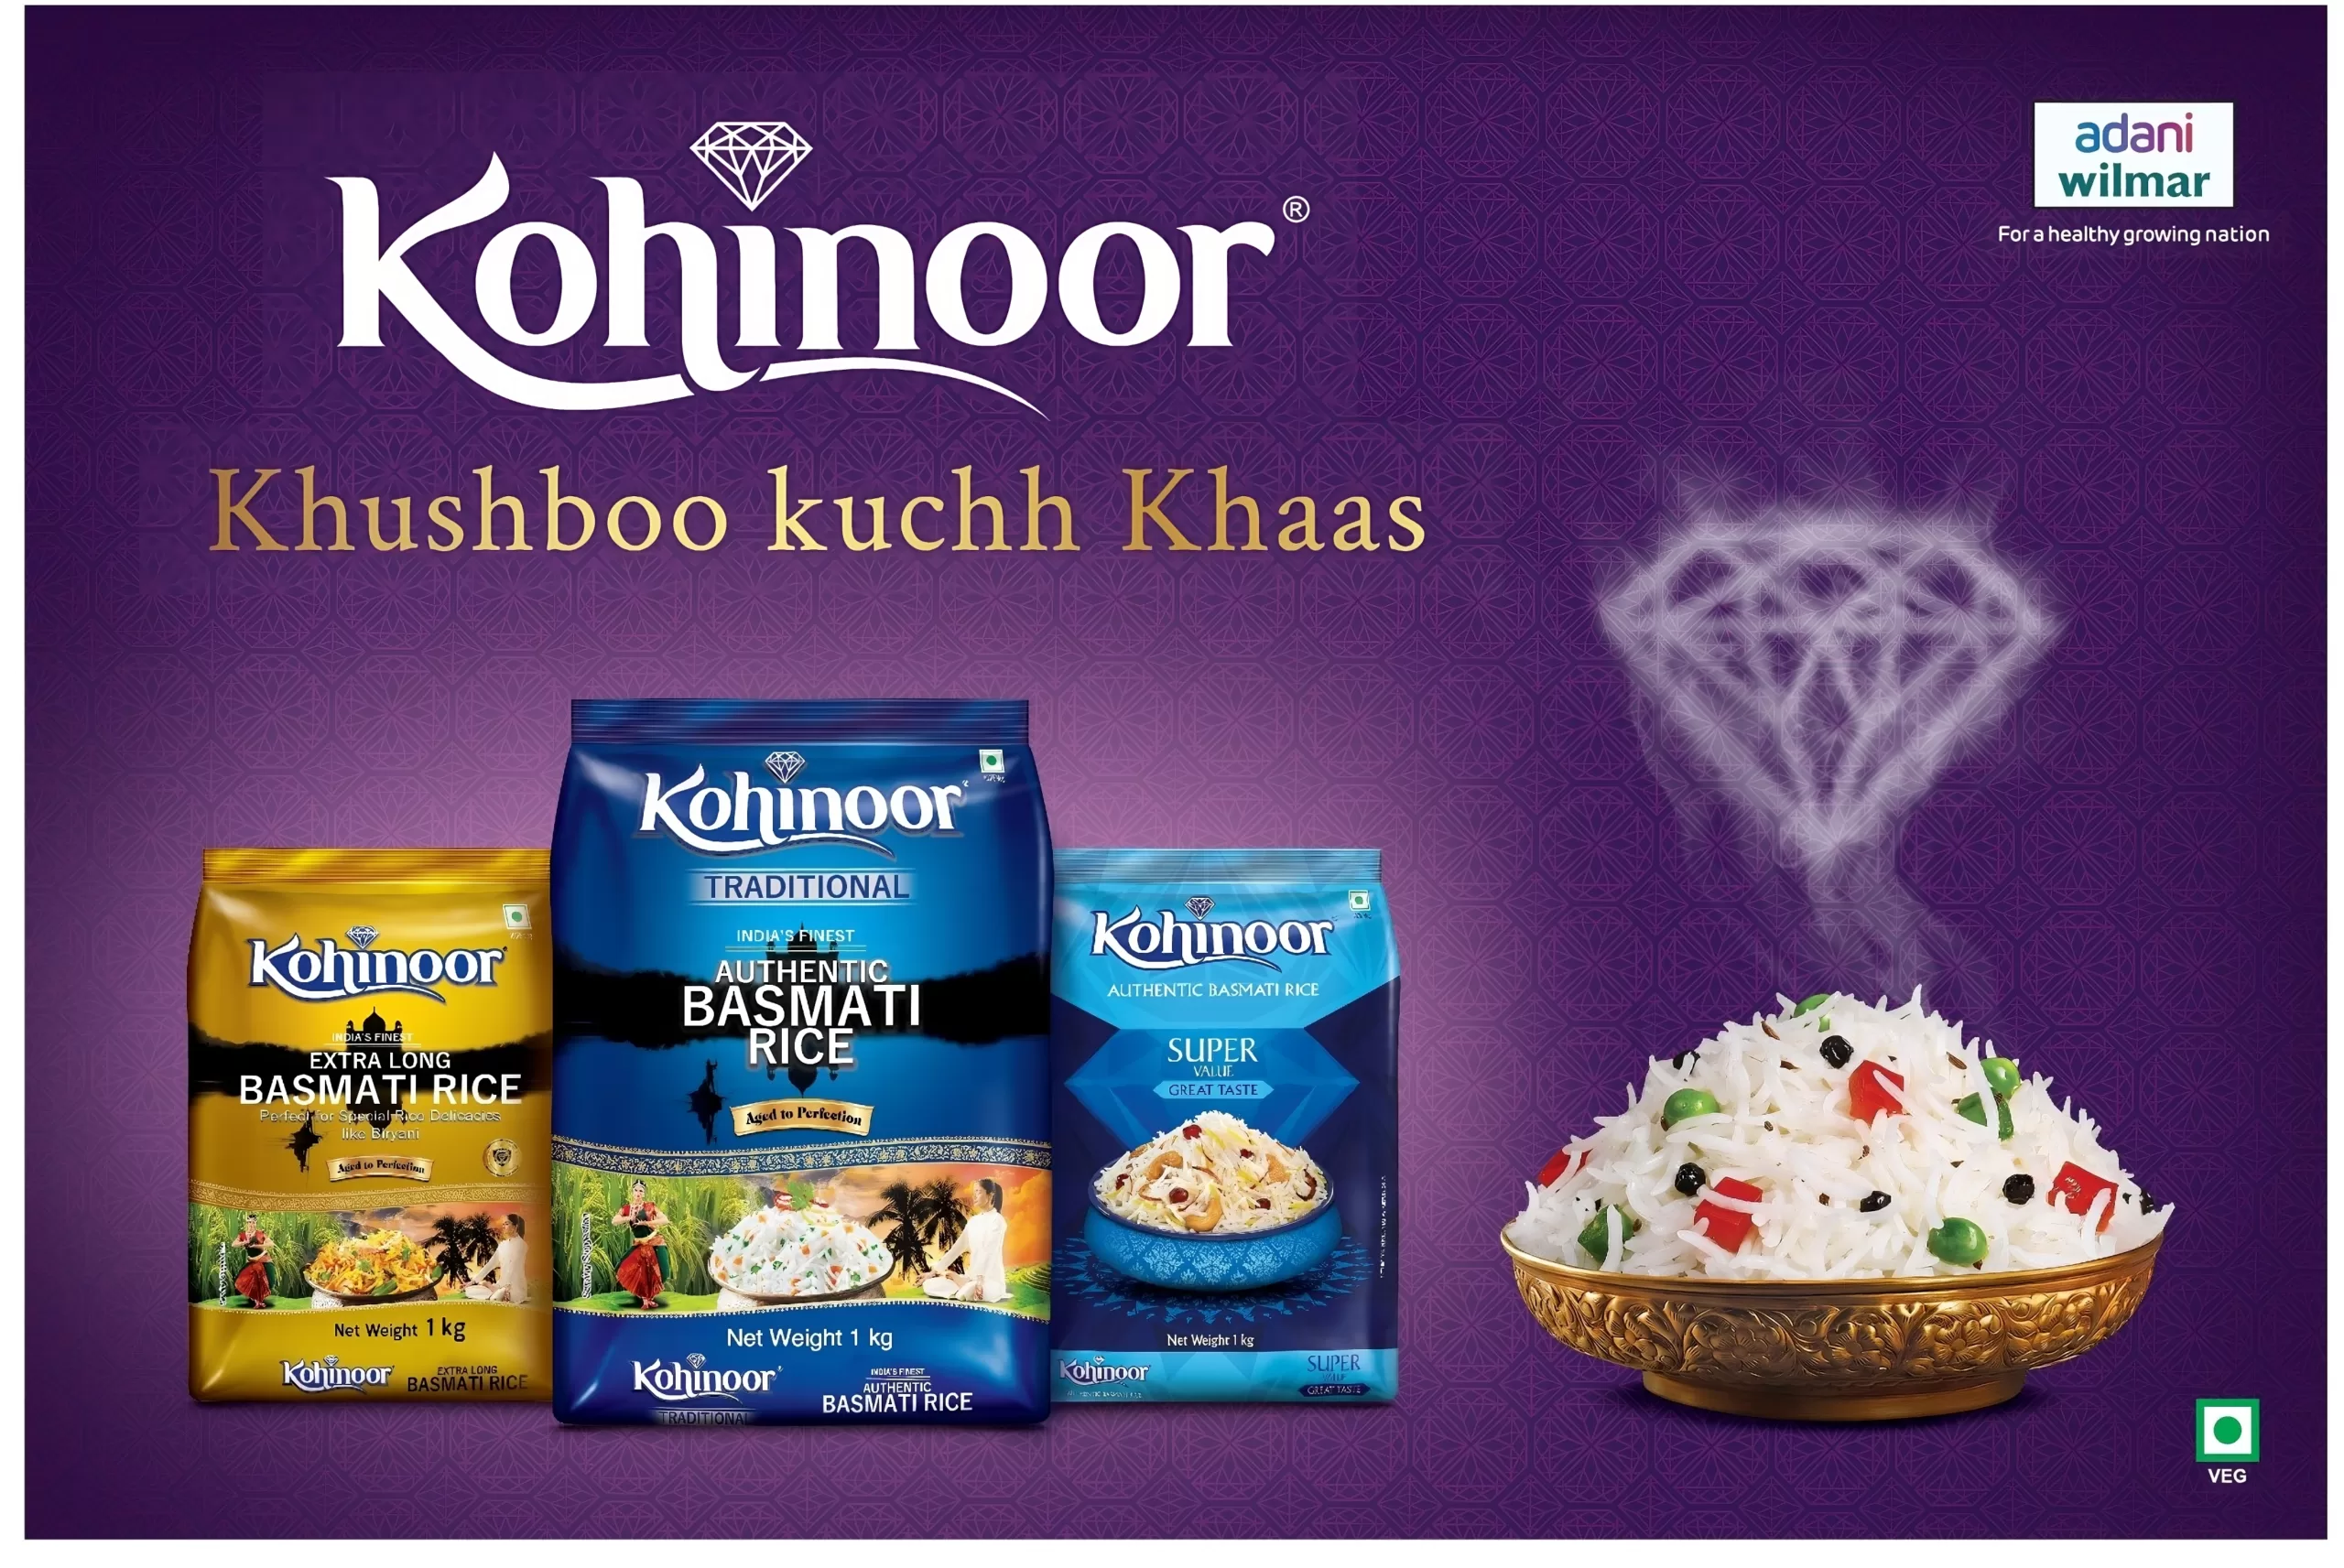 Adani Wilmar’s Iconic Kohinoor Brand Showcases Power of Aroma in Visual Masterpiece with ‘Khushboo Kuchh Khaas’ campaign